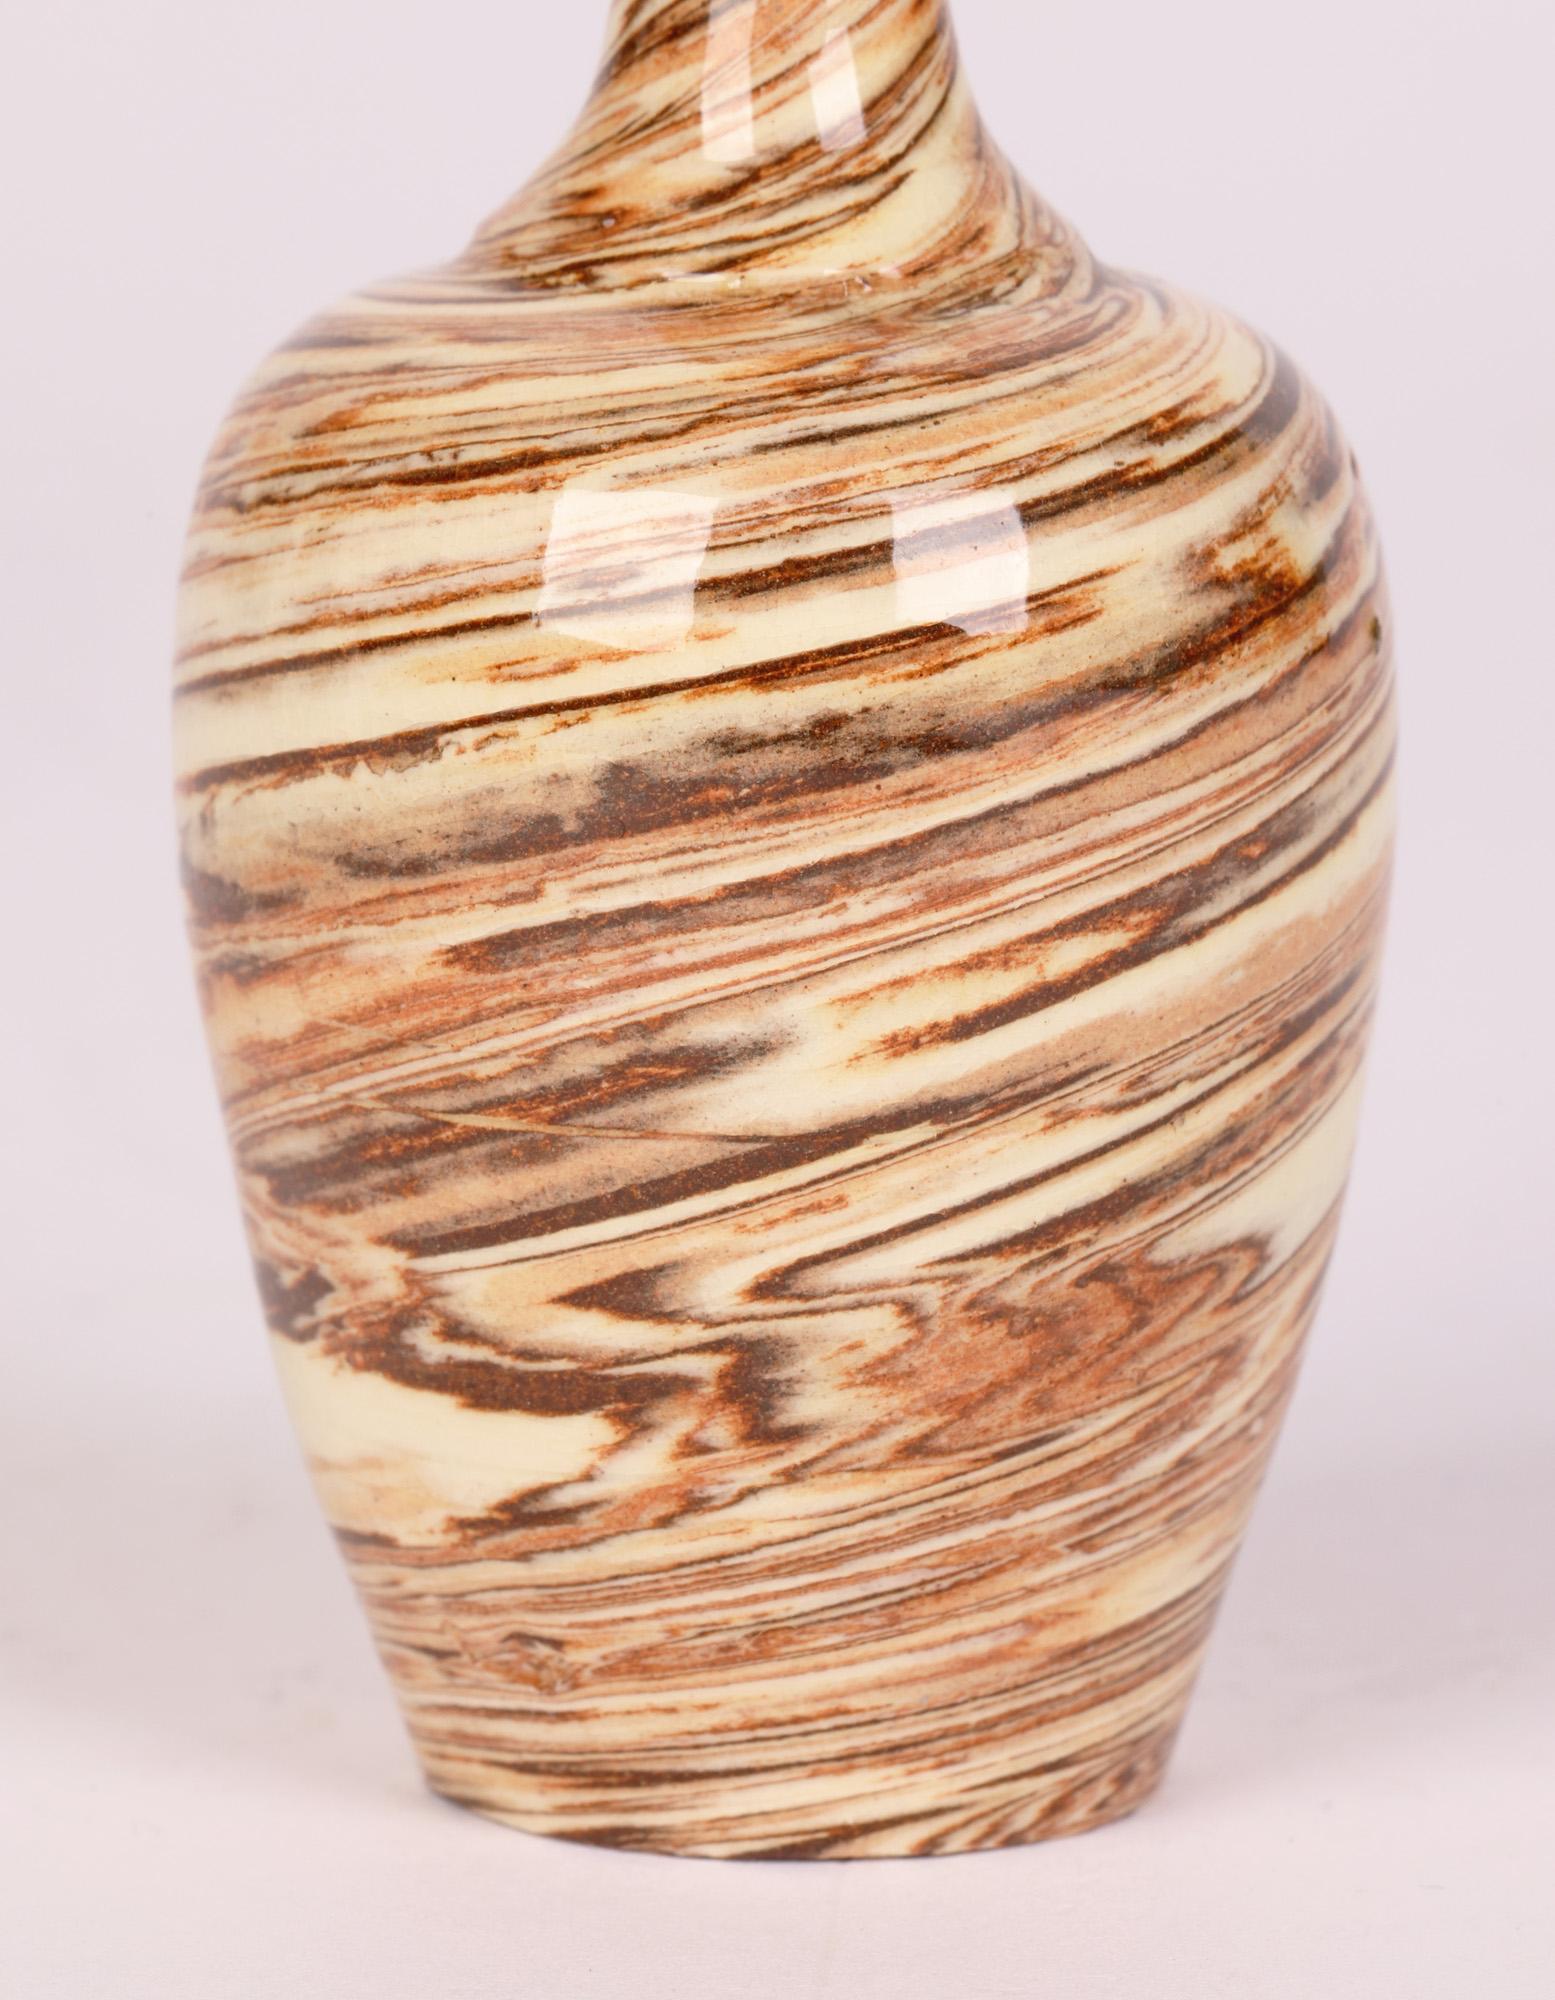 A stunning antique English miniature slip ware agate pattern pottery vase of bottle shape dating from the 19th century. The vase stands on a narrow round foot with recessed base and has a round bulbous shaped body and tall slender neck widening